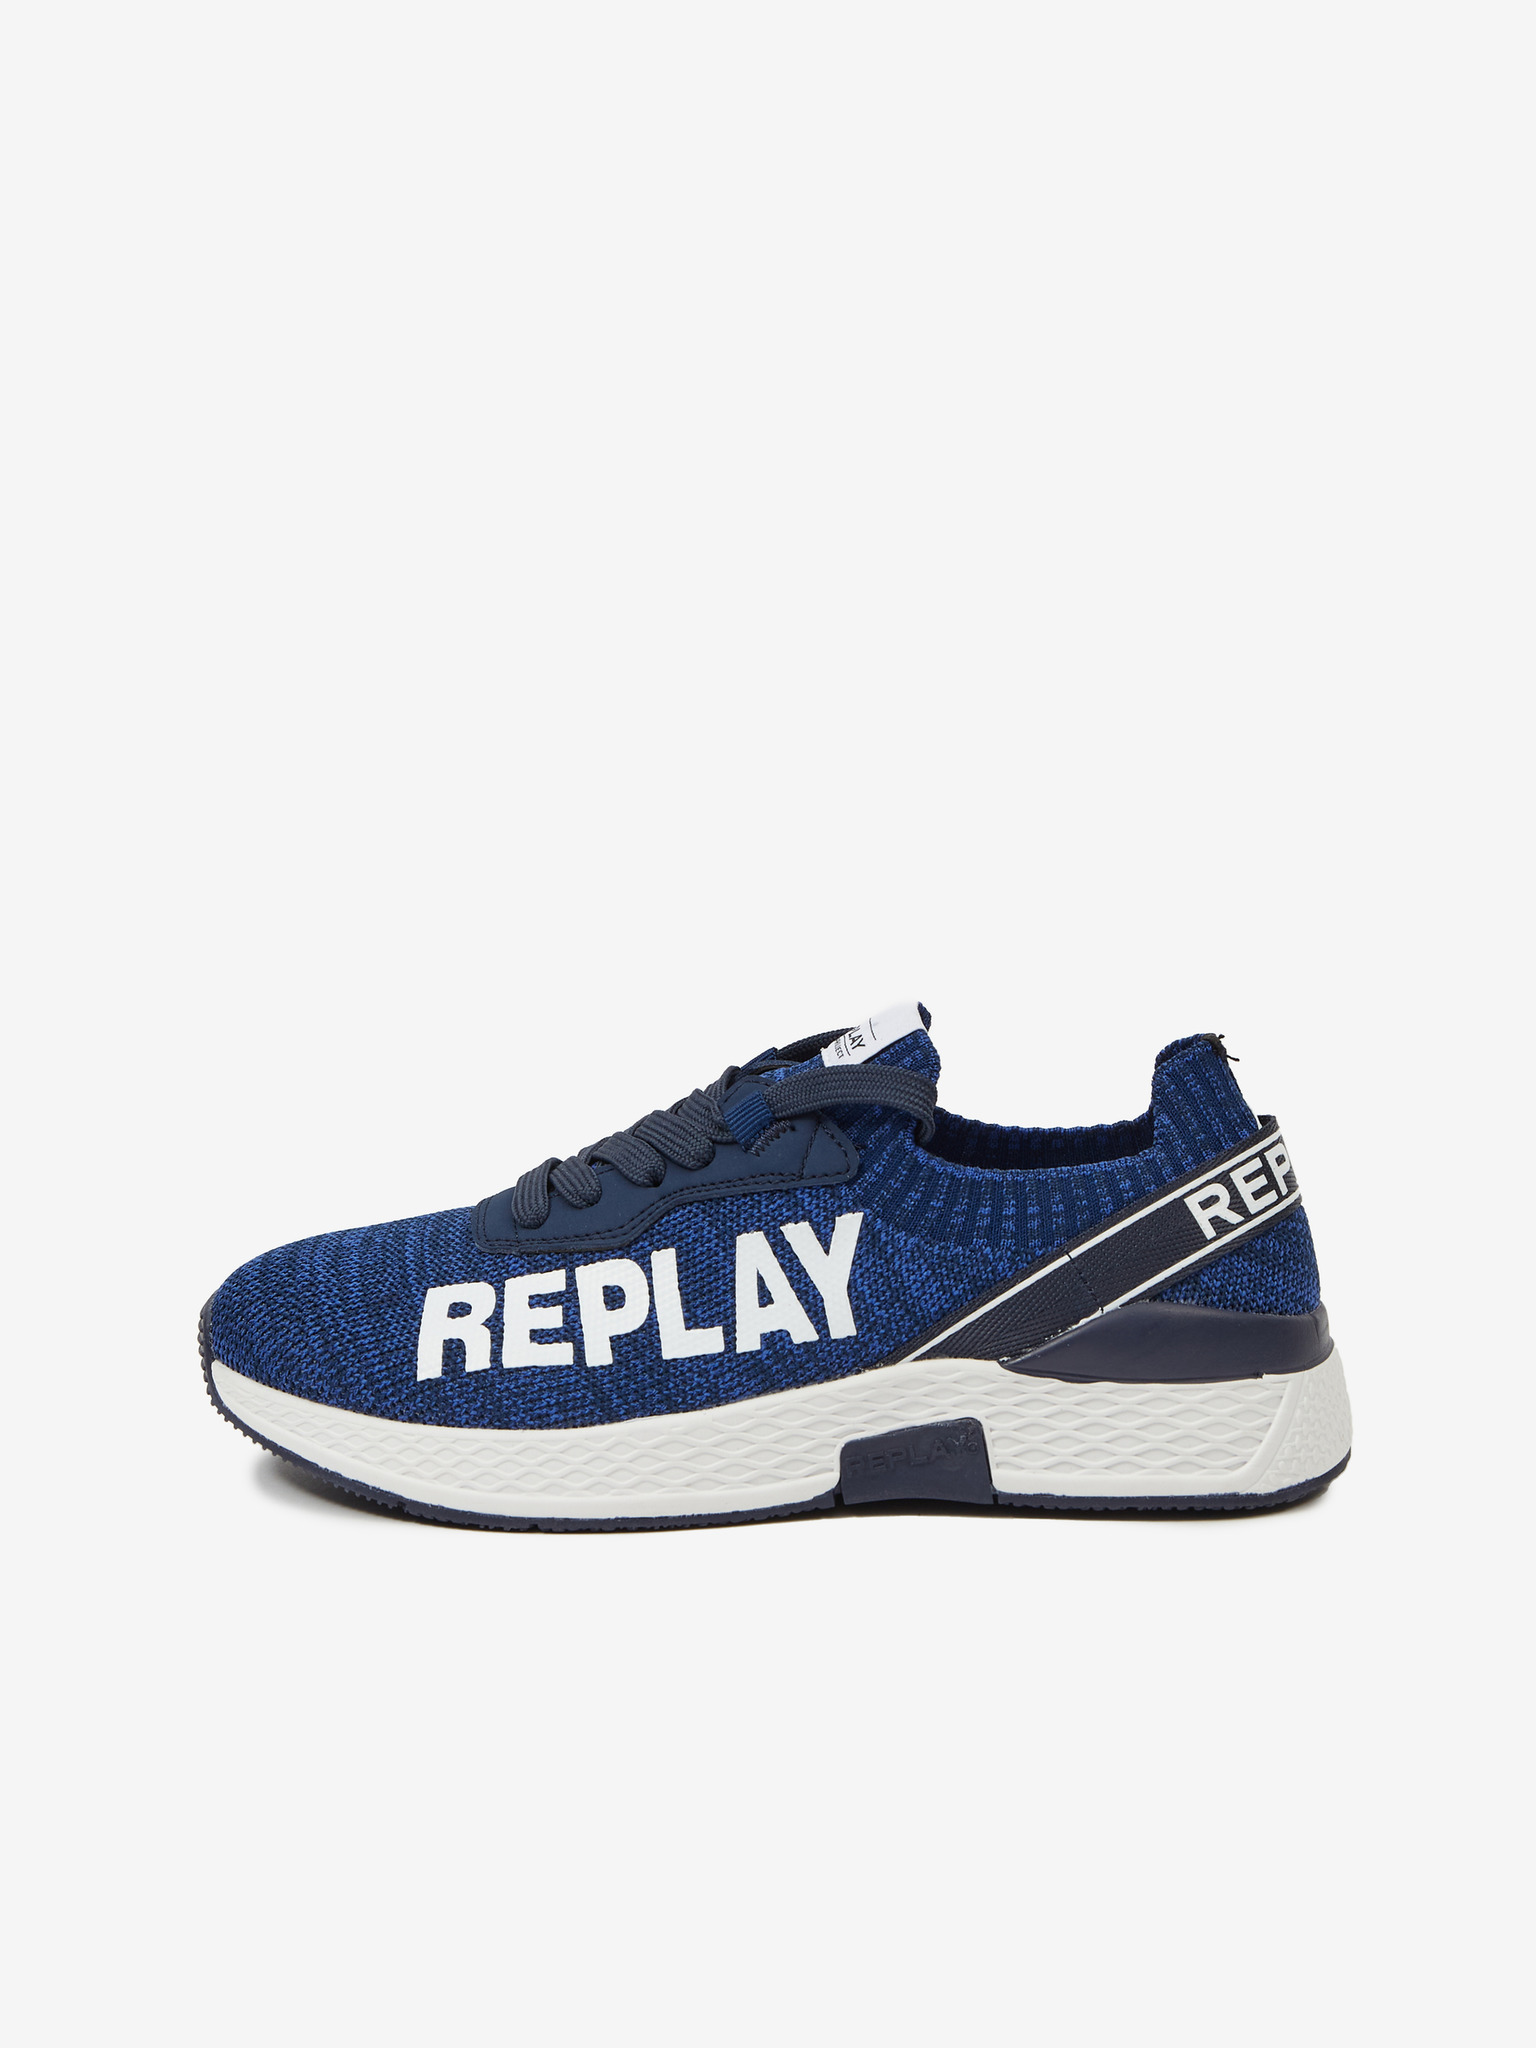 ORIGINAL REPLAY SOCK SNEAKERS SHOES THICK SOLE BRAND LOGO FOR BOYS